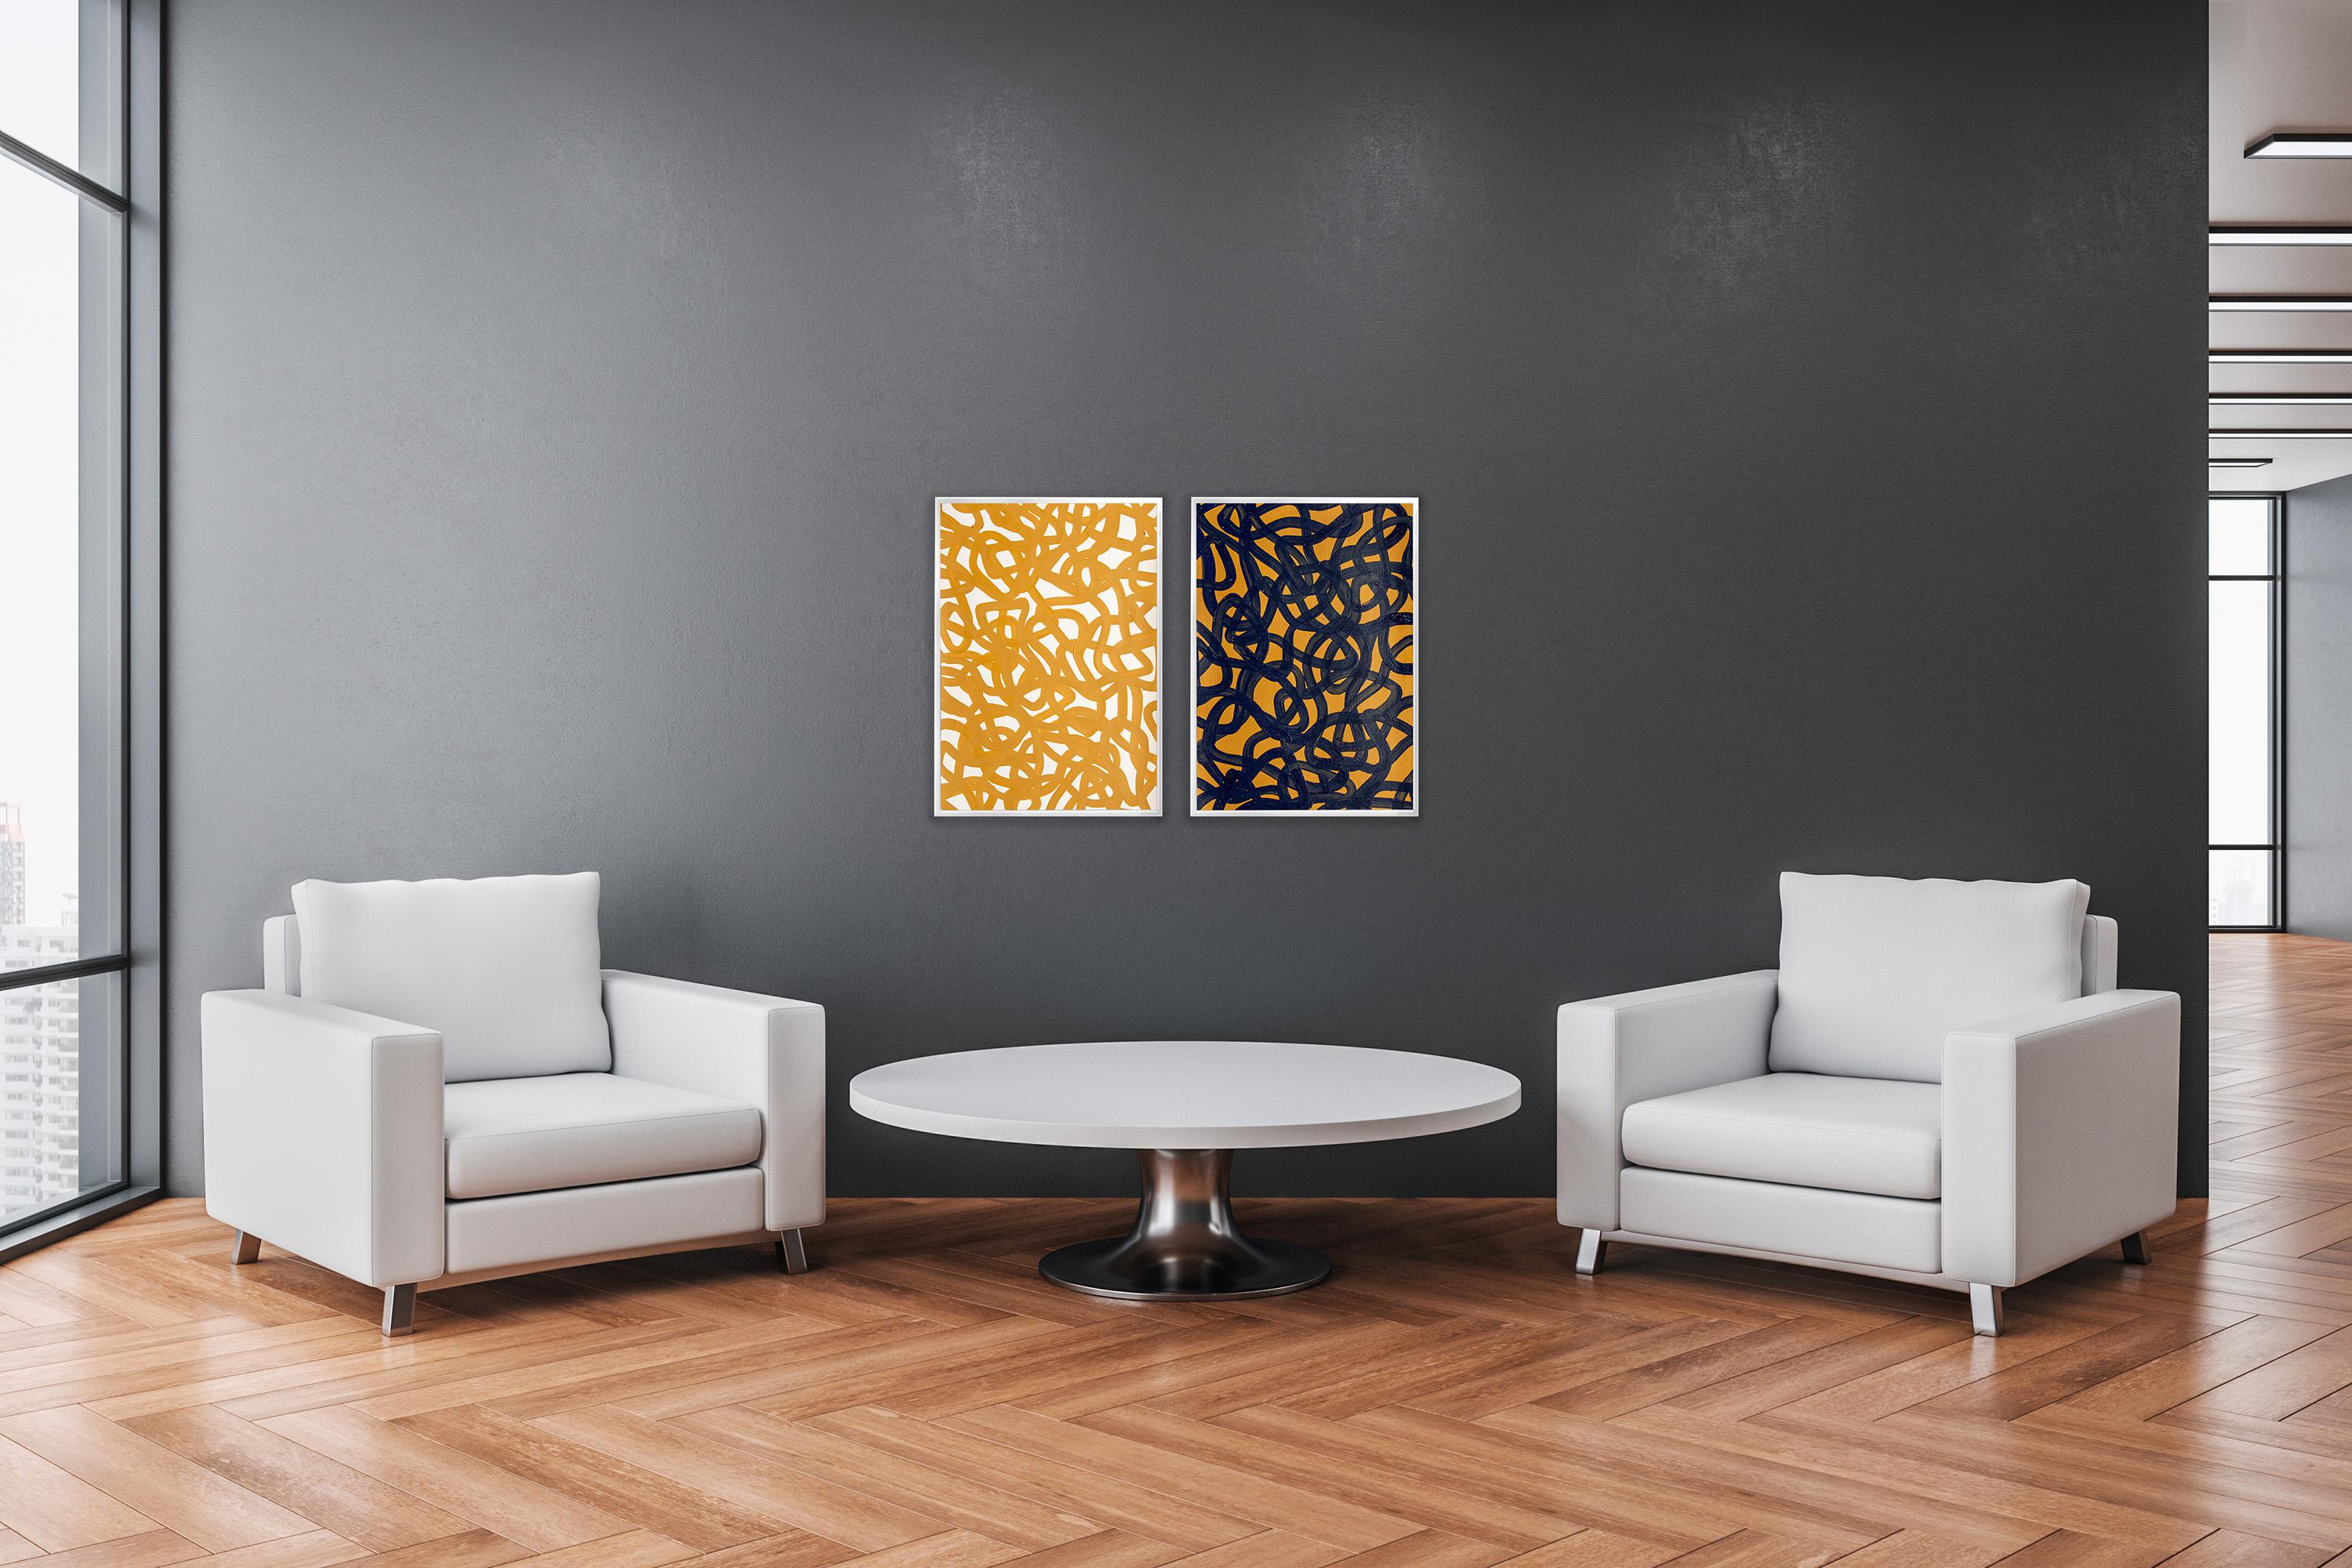 Ochre and Black Diptych, Overlapping White Abstract Fish Gestures, Mediterranean For Sale 6